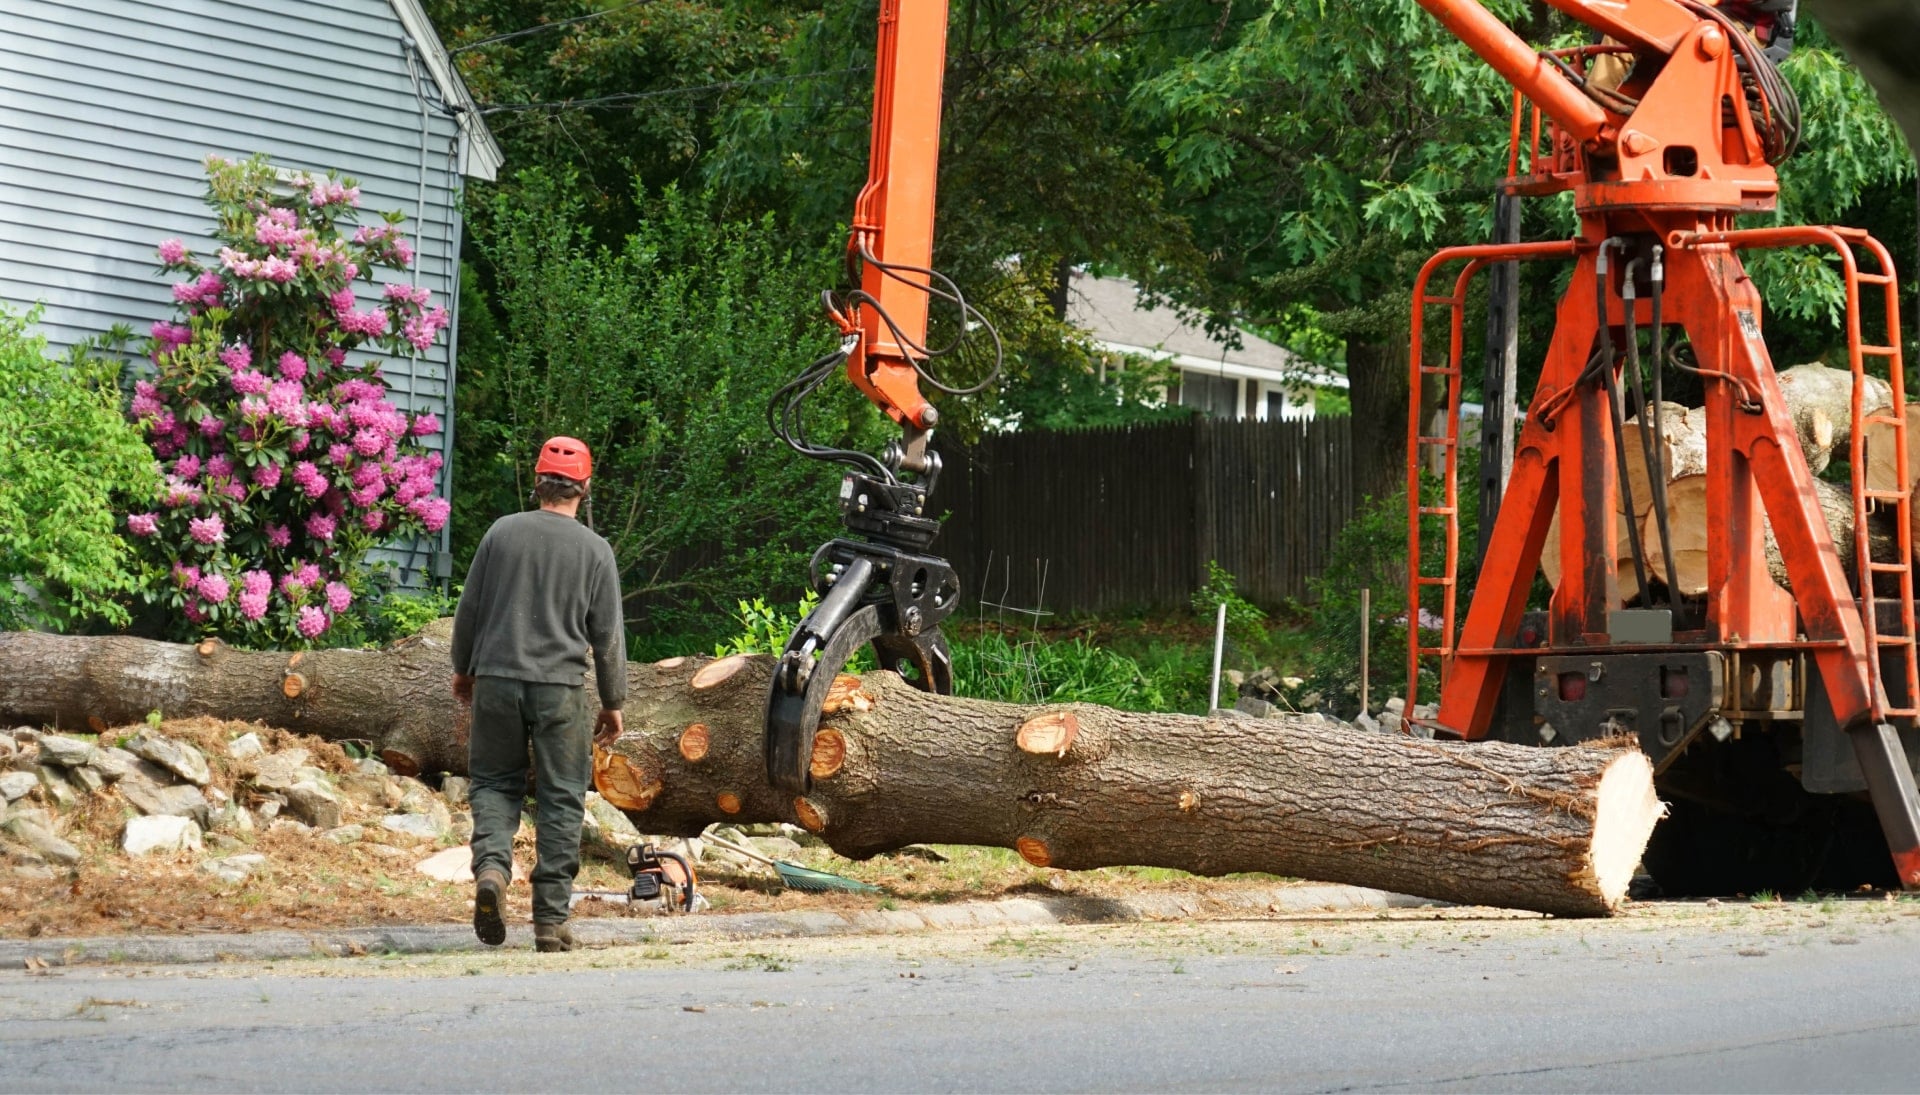 Local partner for Tree removal services in Miami